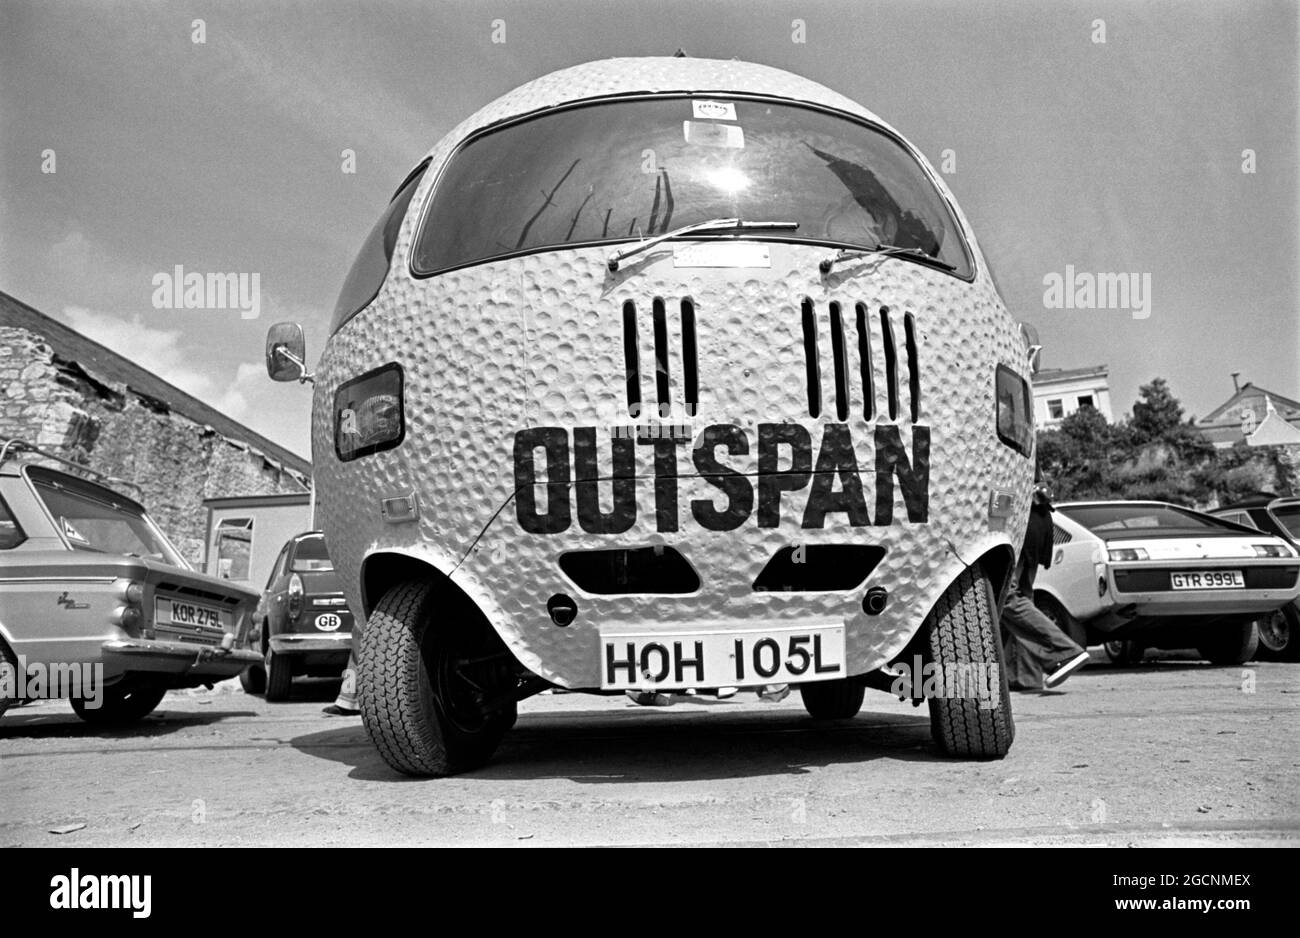 AJAXNETPHOTO. 1976. PLYMOUTH, ENGLAND. - OUTSPAN PROMO - ROADWORTHY CUSTOM MADE PASSENGER VEHICLE ADVERTISING THE OUTSPAN FRUIT BRAND PARKED ON THE DOCKSIDE AT MILBAY DURING THE RUN-UP TO THE START OF THE OSTAR YACHT RACE. BASED ON A BMC MINI, THIS IS ONE OF SEVERAL MADE BY BRIAN WAITE ENTERPRISES. PHOTO:JONATHAN EASTLAND/AJAX REF:2760506 24002 Stock Photo